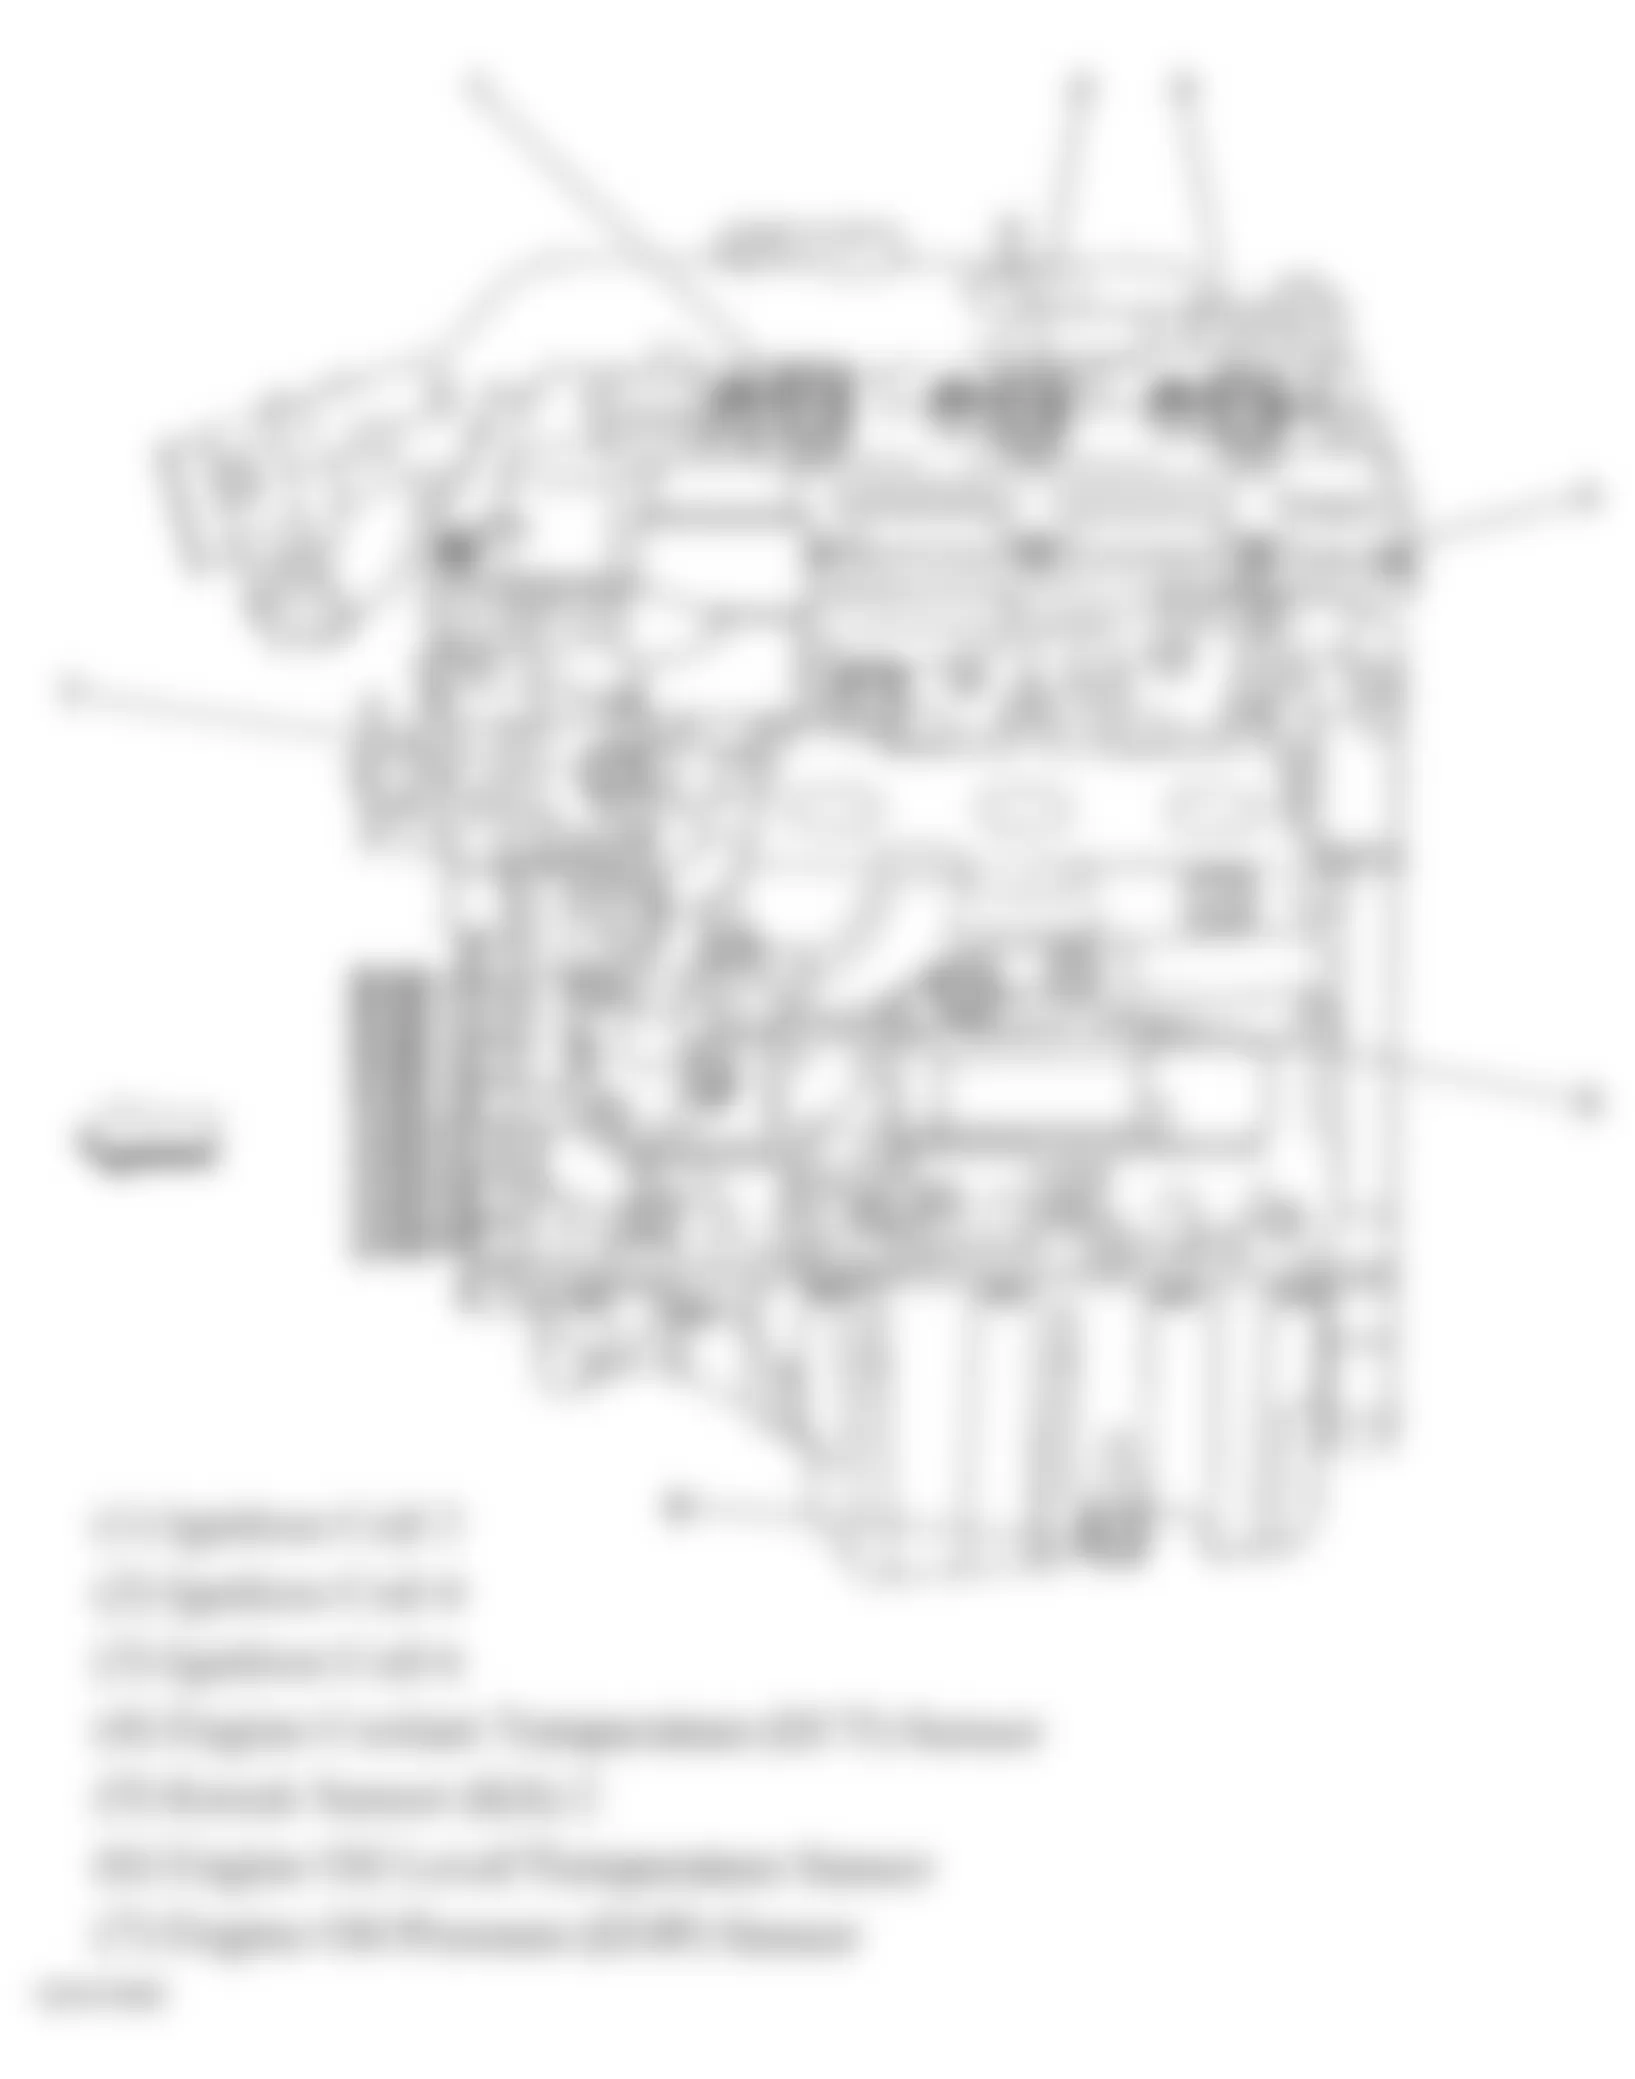 Buick Allure CXL 2008 - Component Locations -  Left Side Of Engine (3.6L)